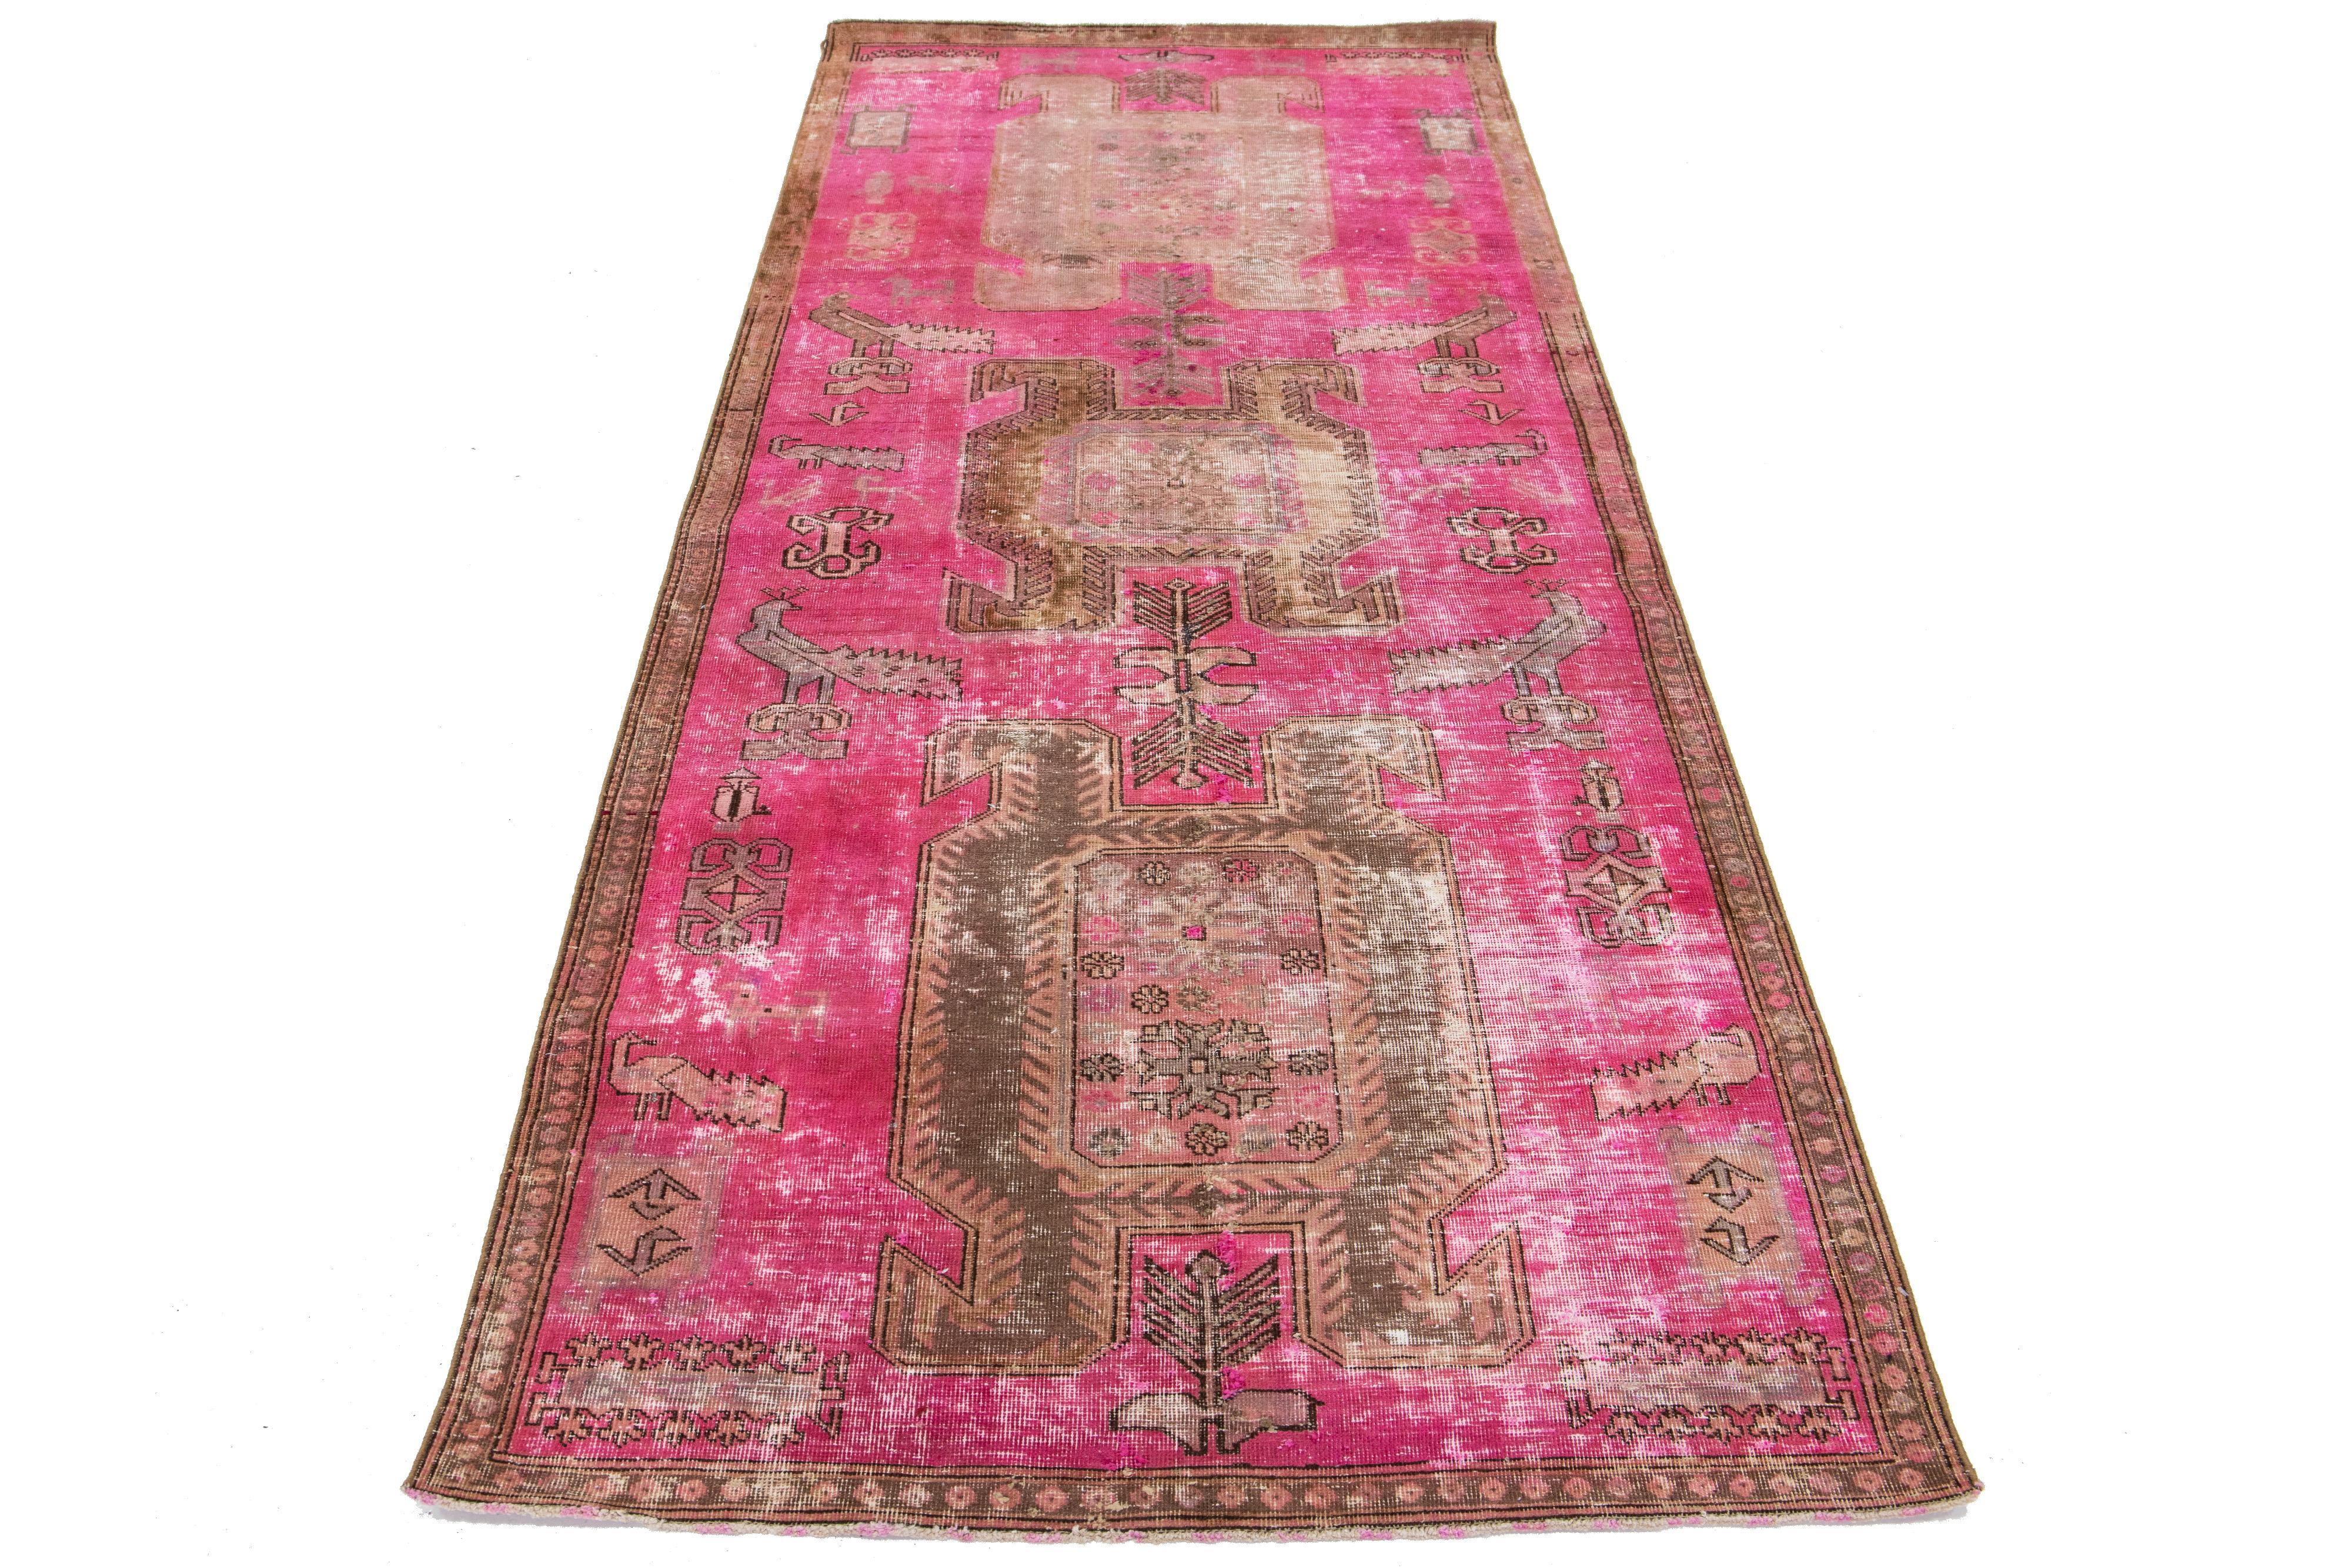 This vintage Persian wool rug features a pink field with gray tribal accents.

This rug measures 3' 9